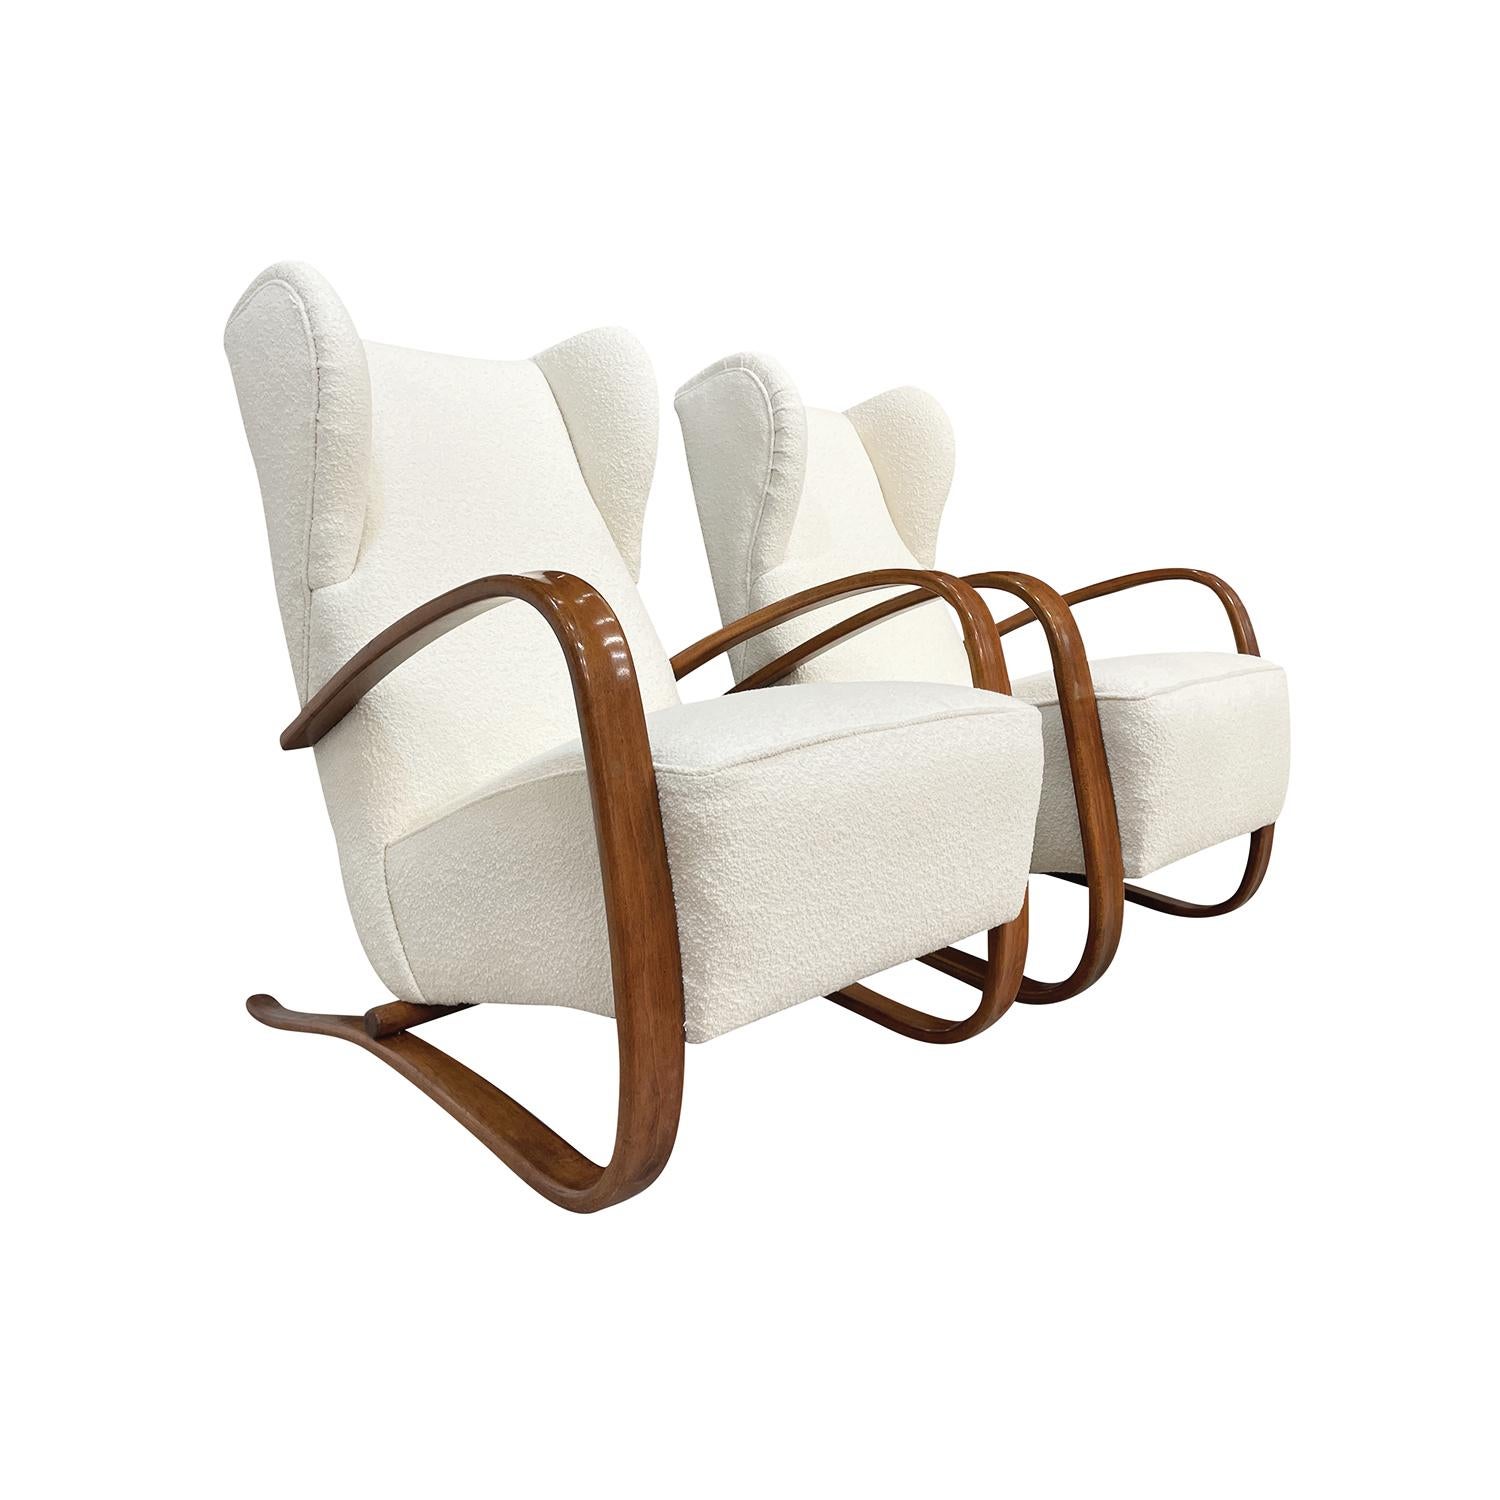 Art Deco 20th Century Czech Pair of Mahogany H269 Lounge Chairs by Jindrich Halabala For Sale